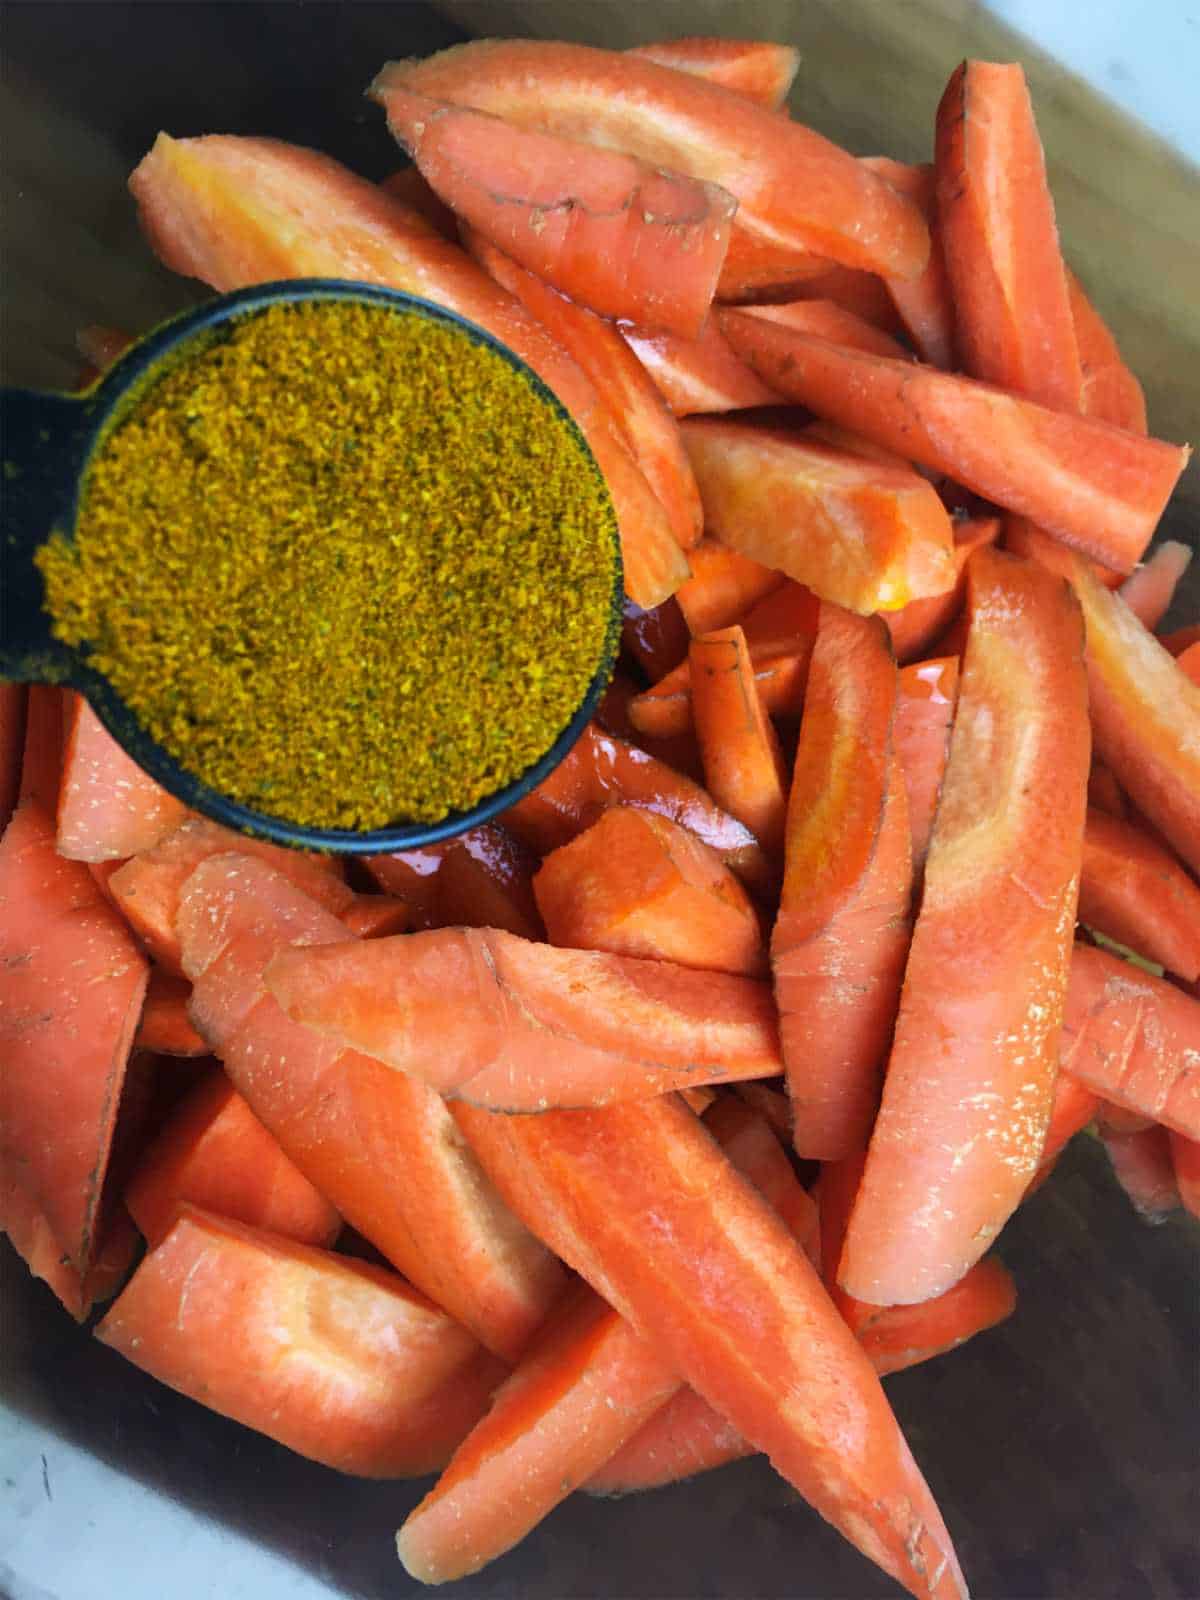 seasoning added to bowl of cut carrots.